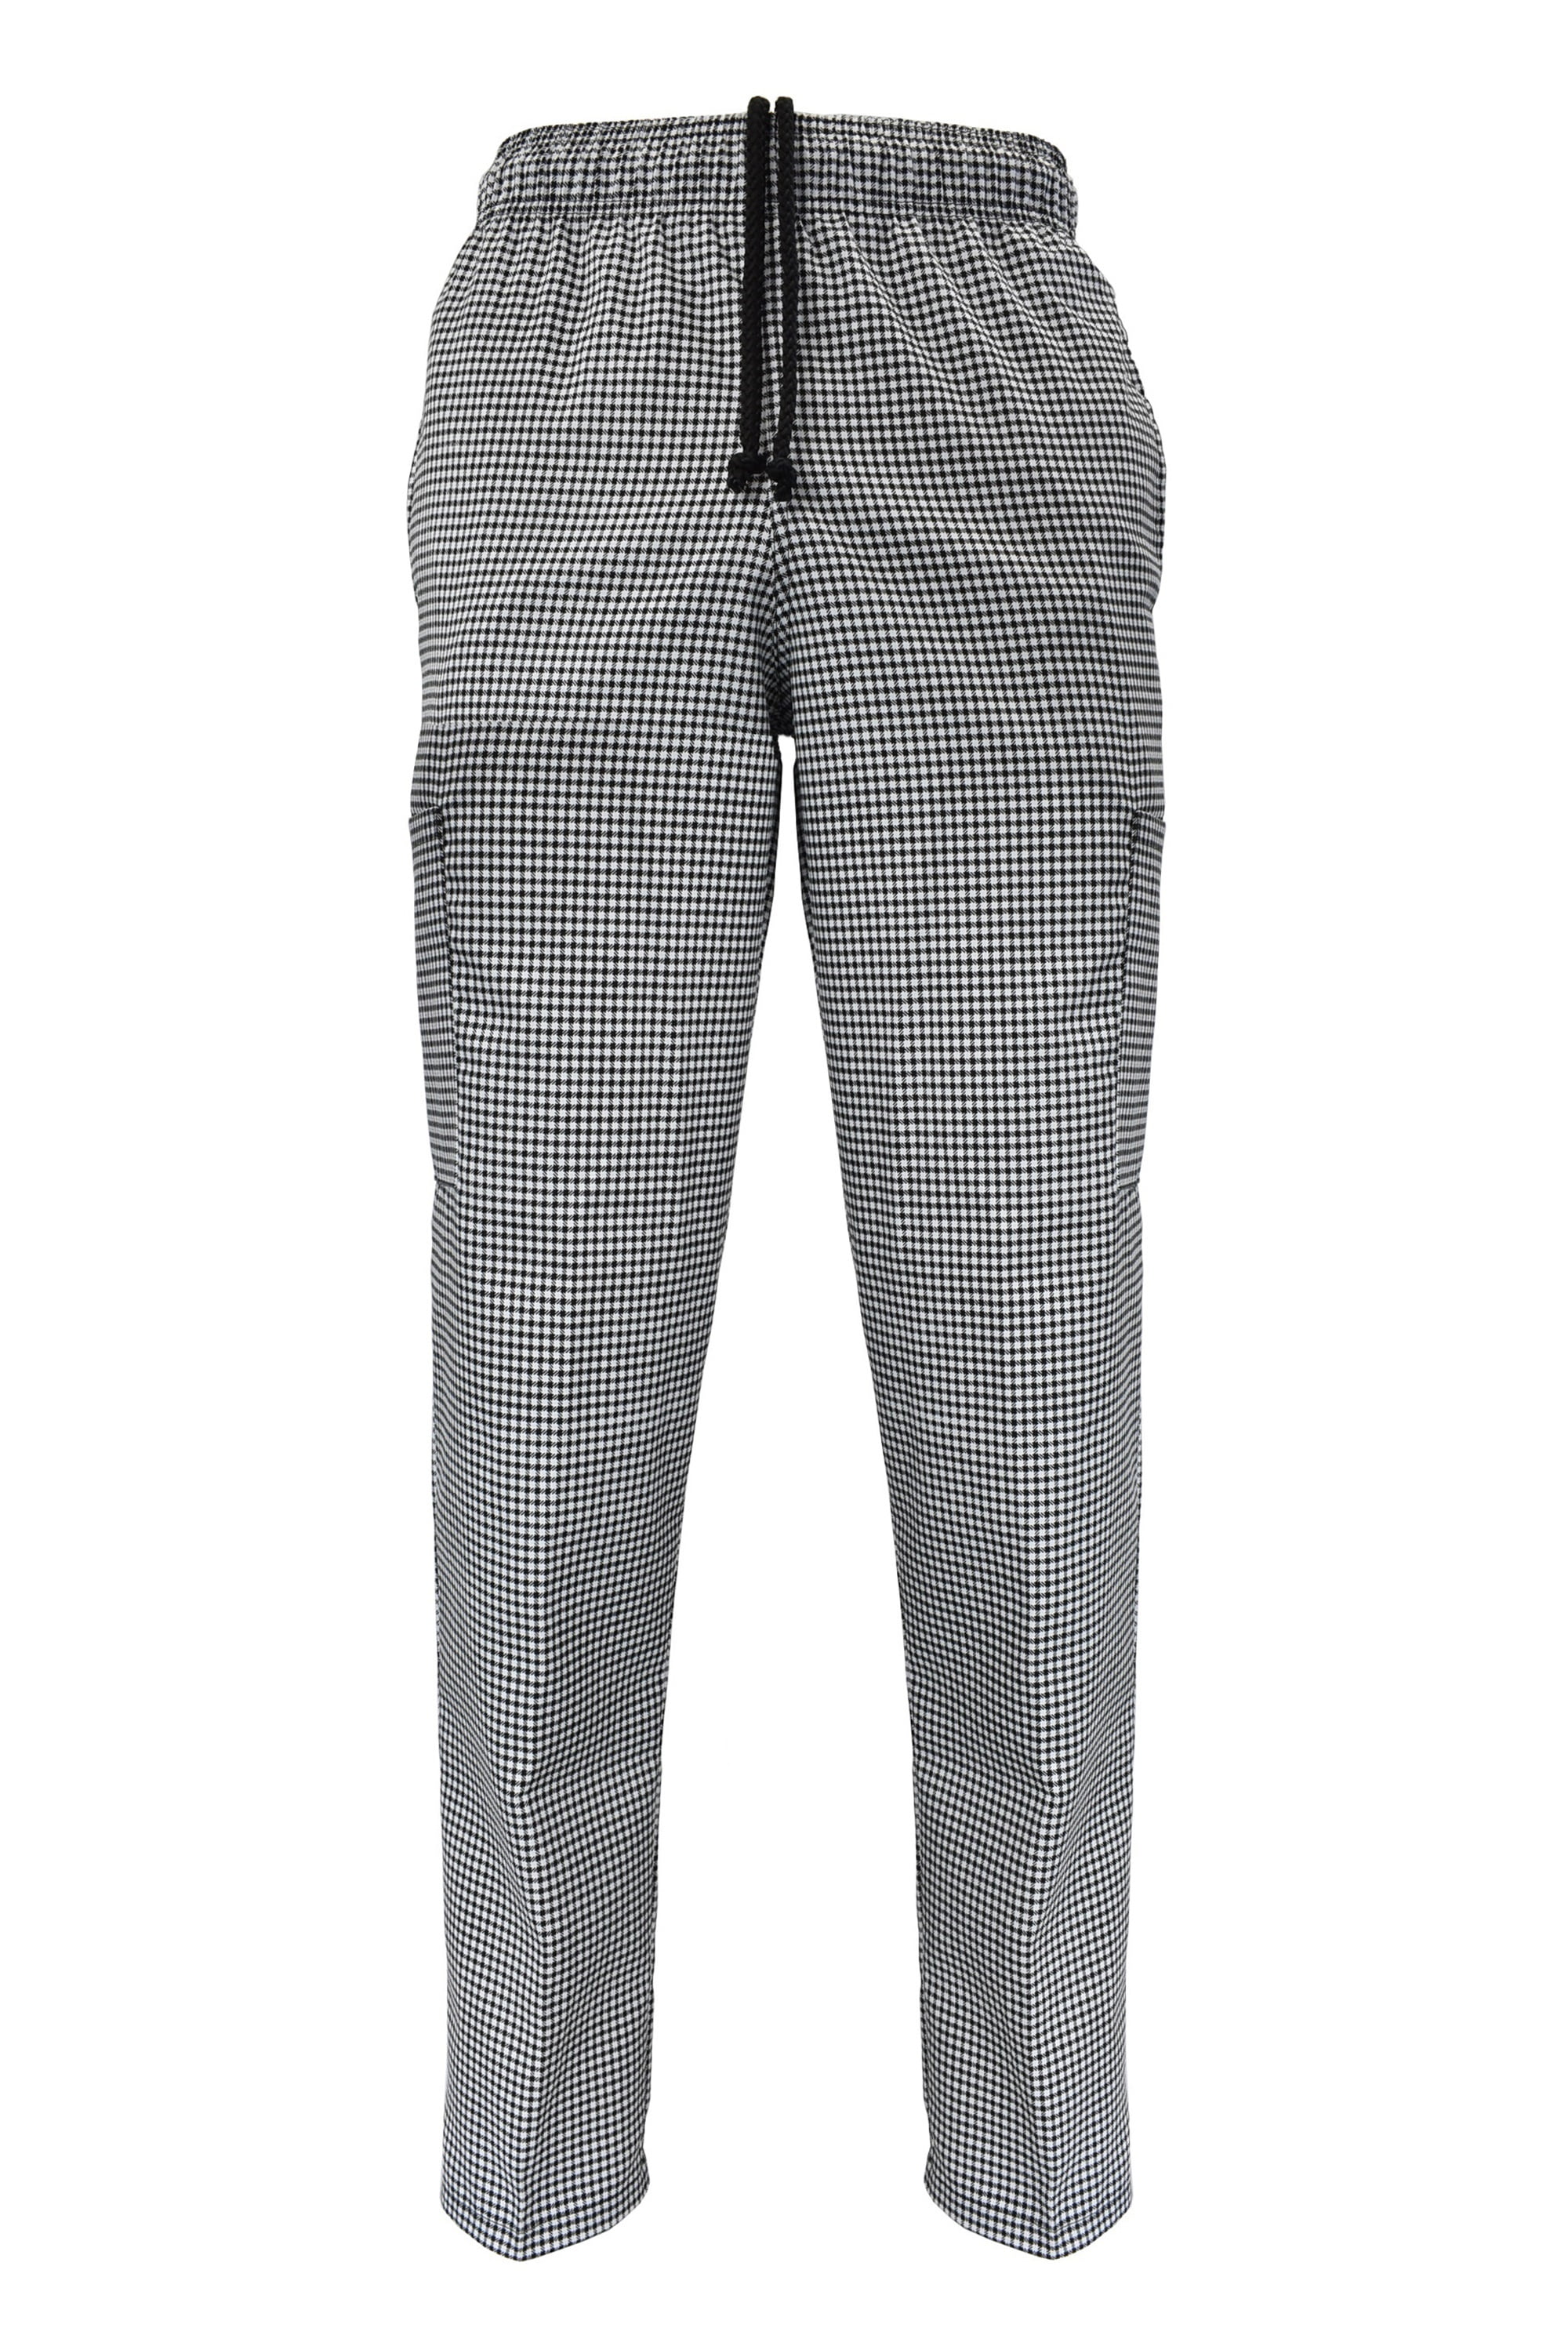 Gingham Check Chef Trousers Pant Black & White Side Pockets Elasticated Uniforms 